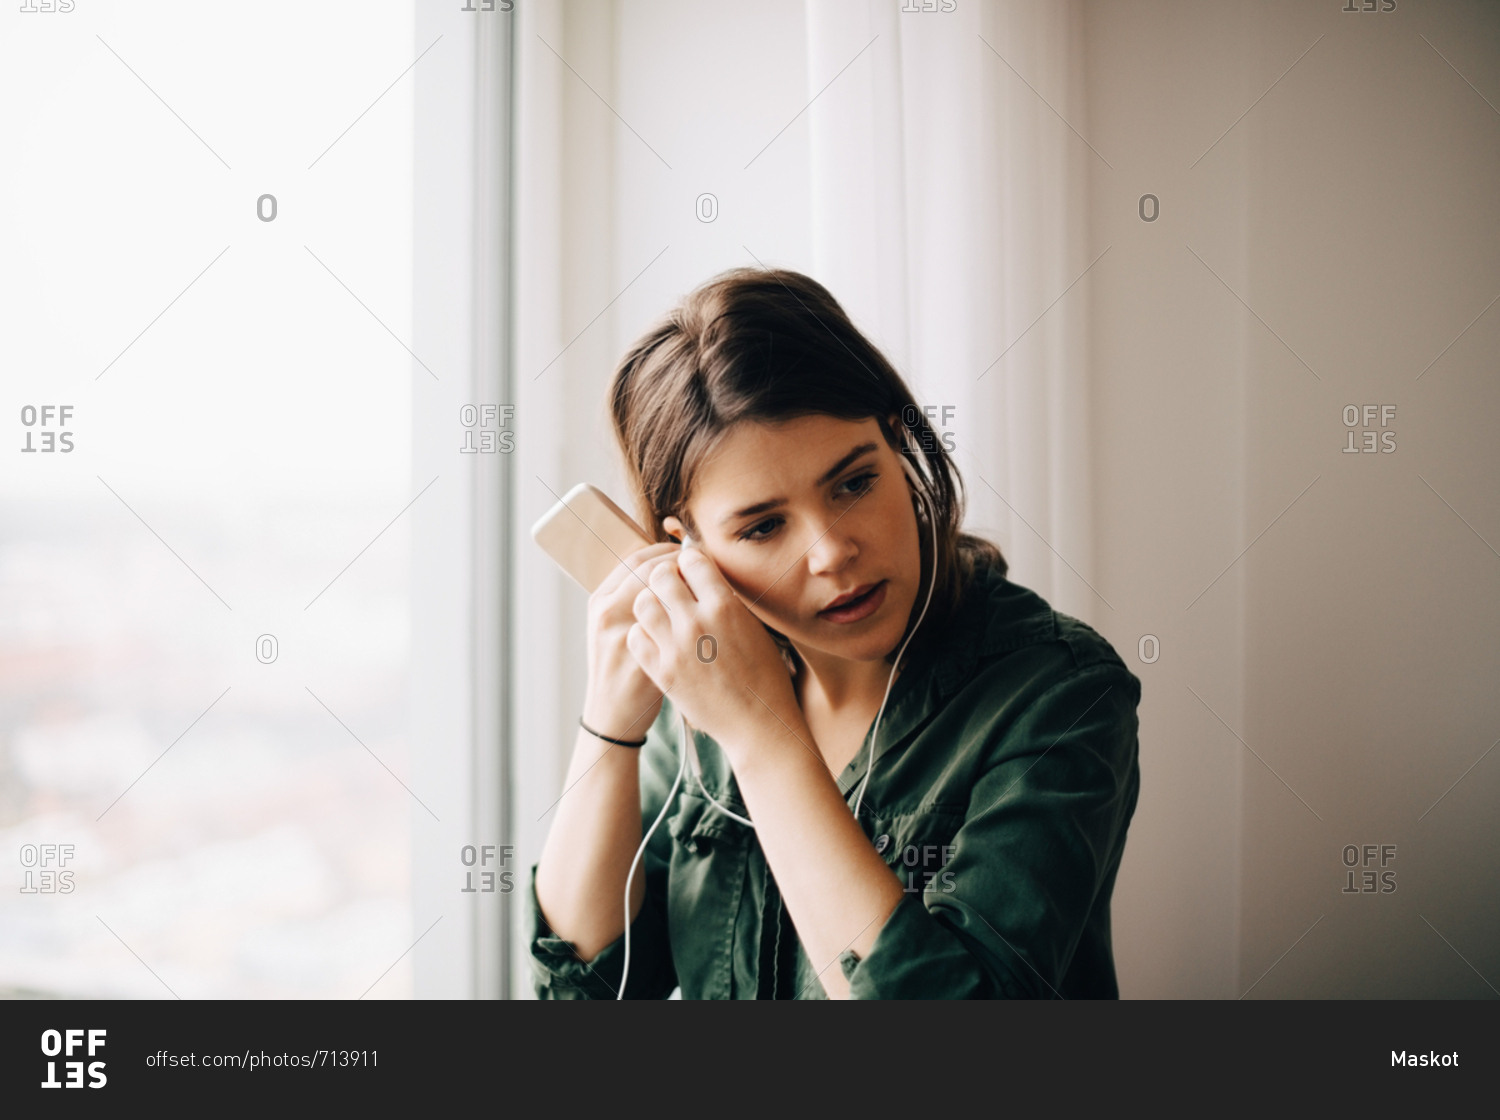 Businesswoman adjusting in-ear headphones while holding smart phone by window at creative office